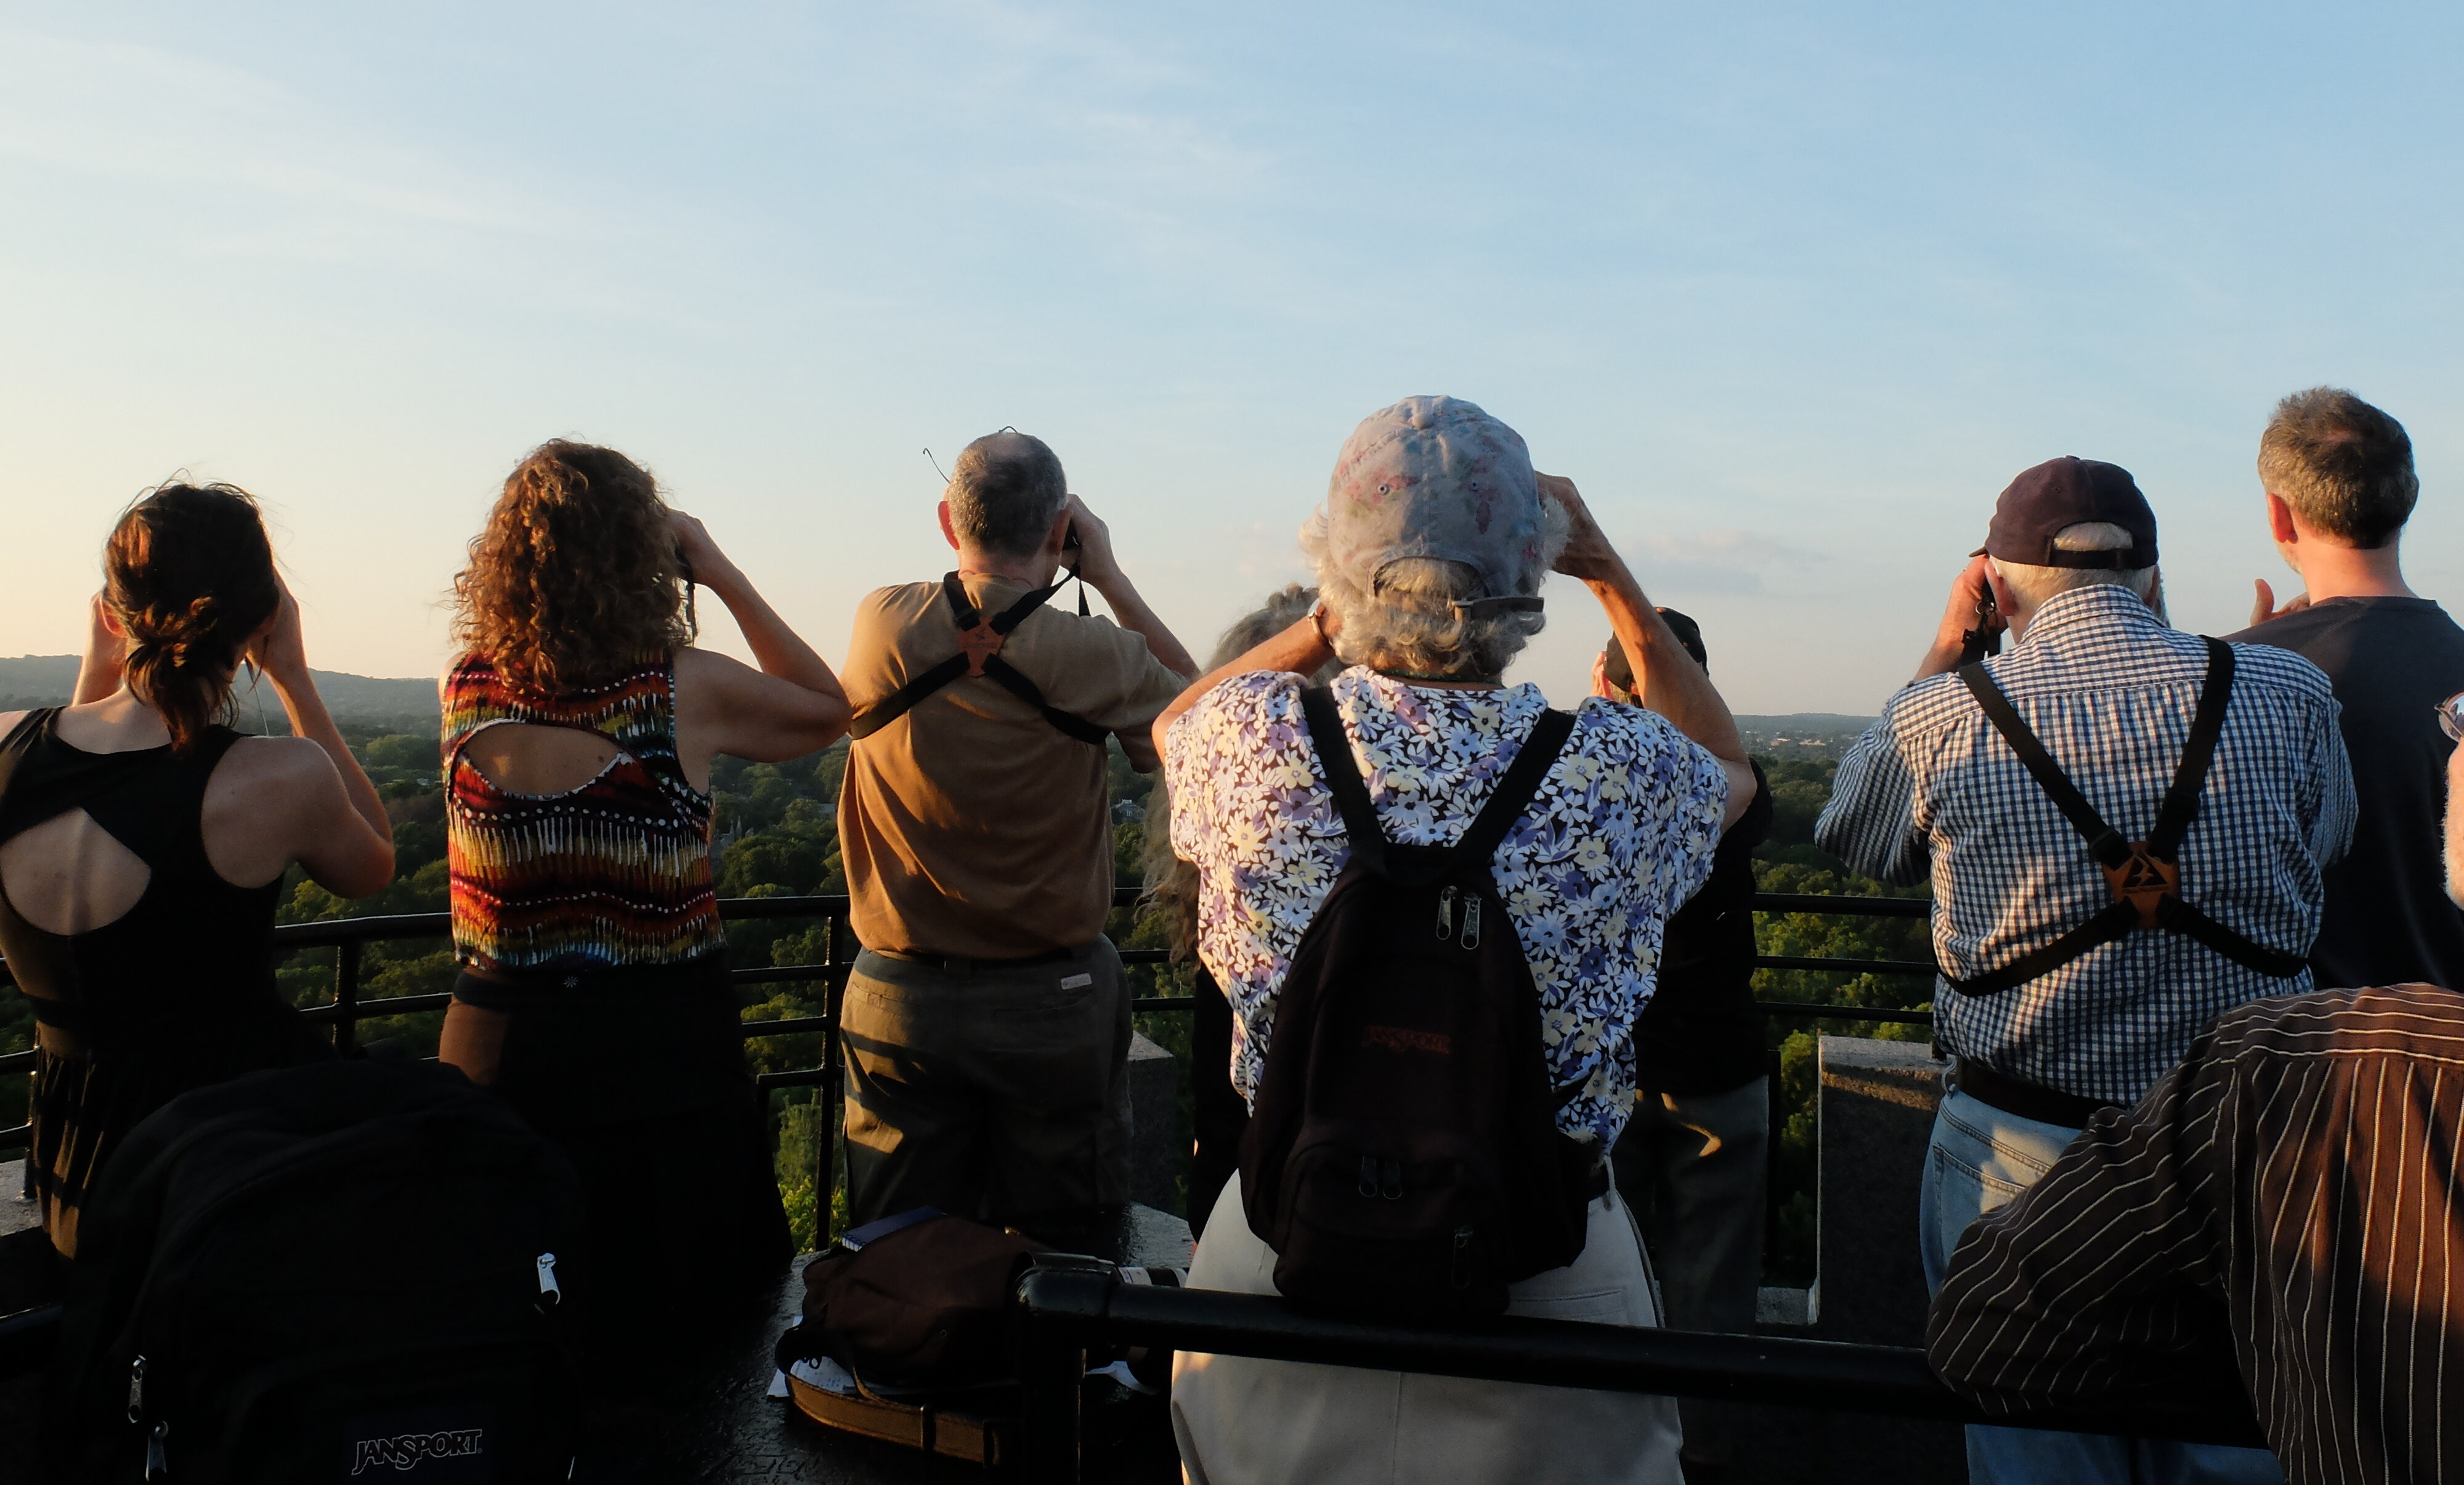 a row of people with binoculars looking up at the sky